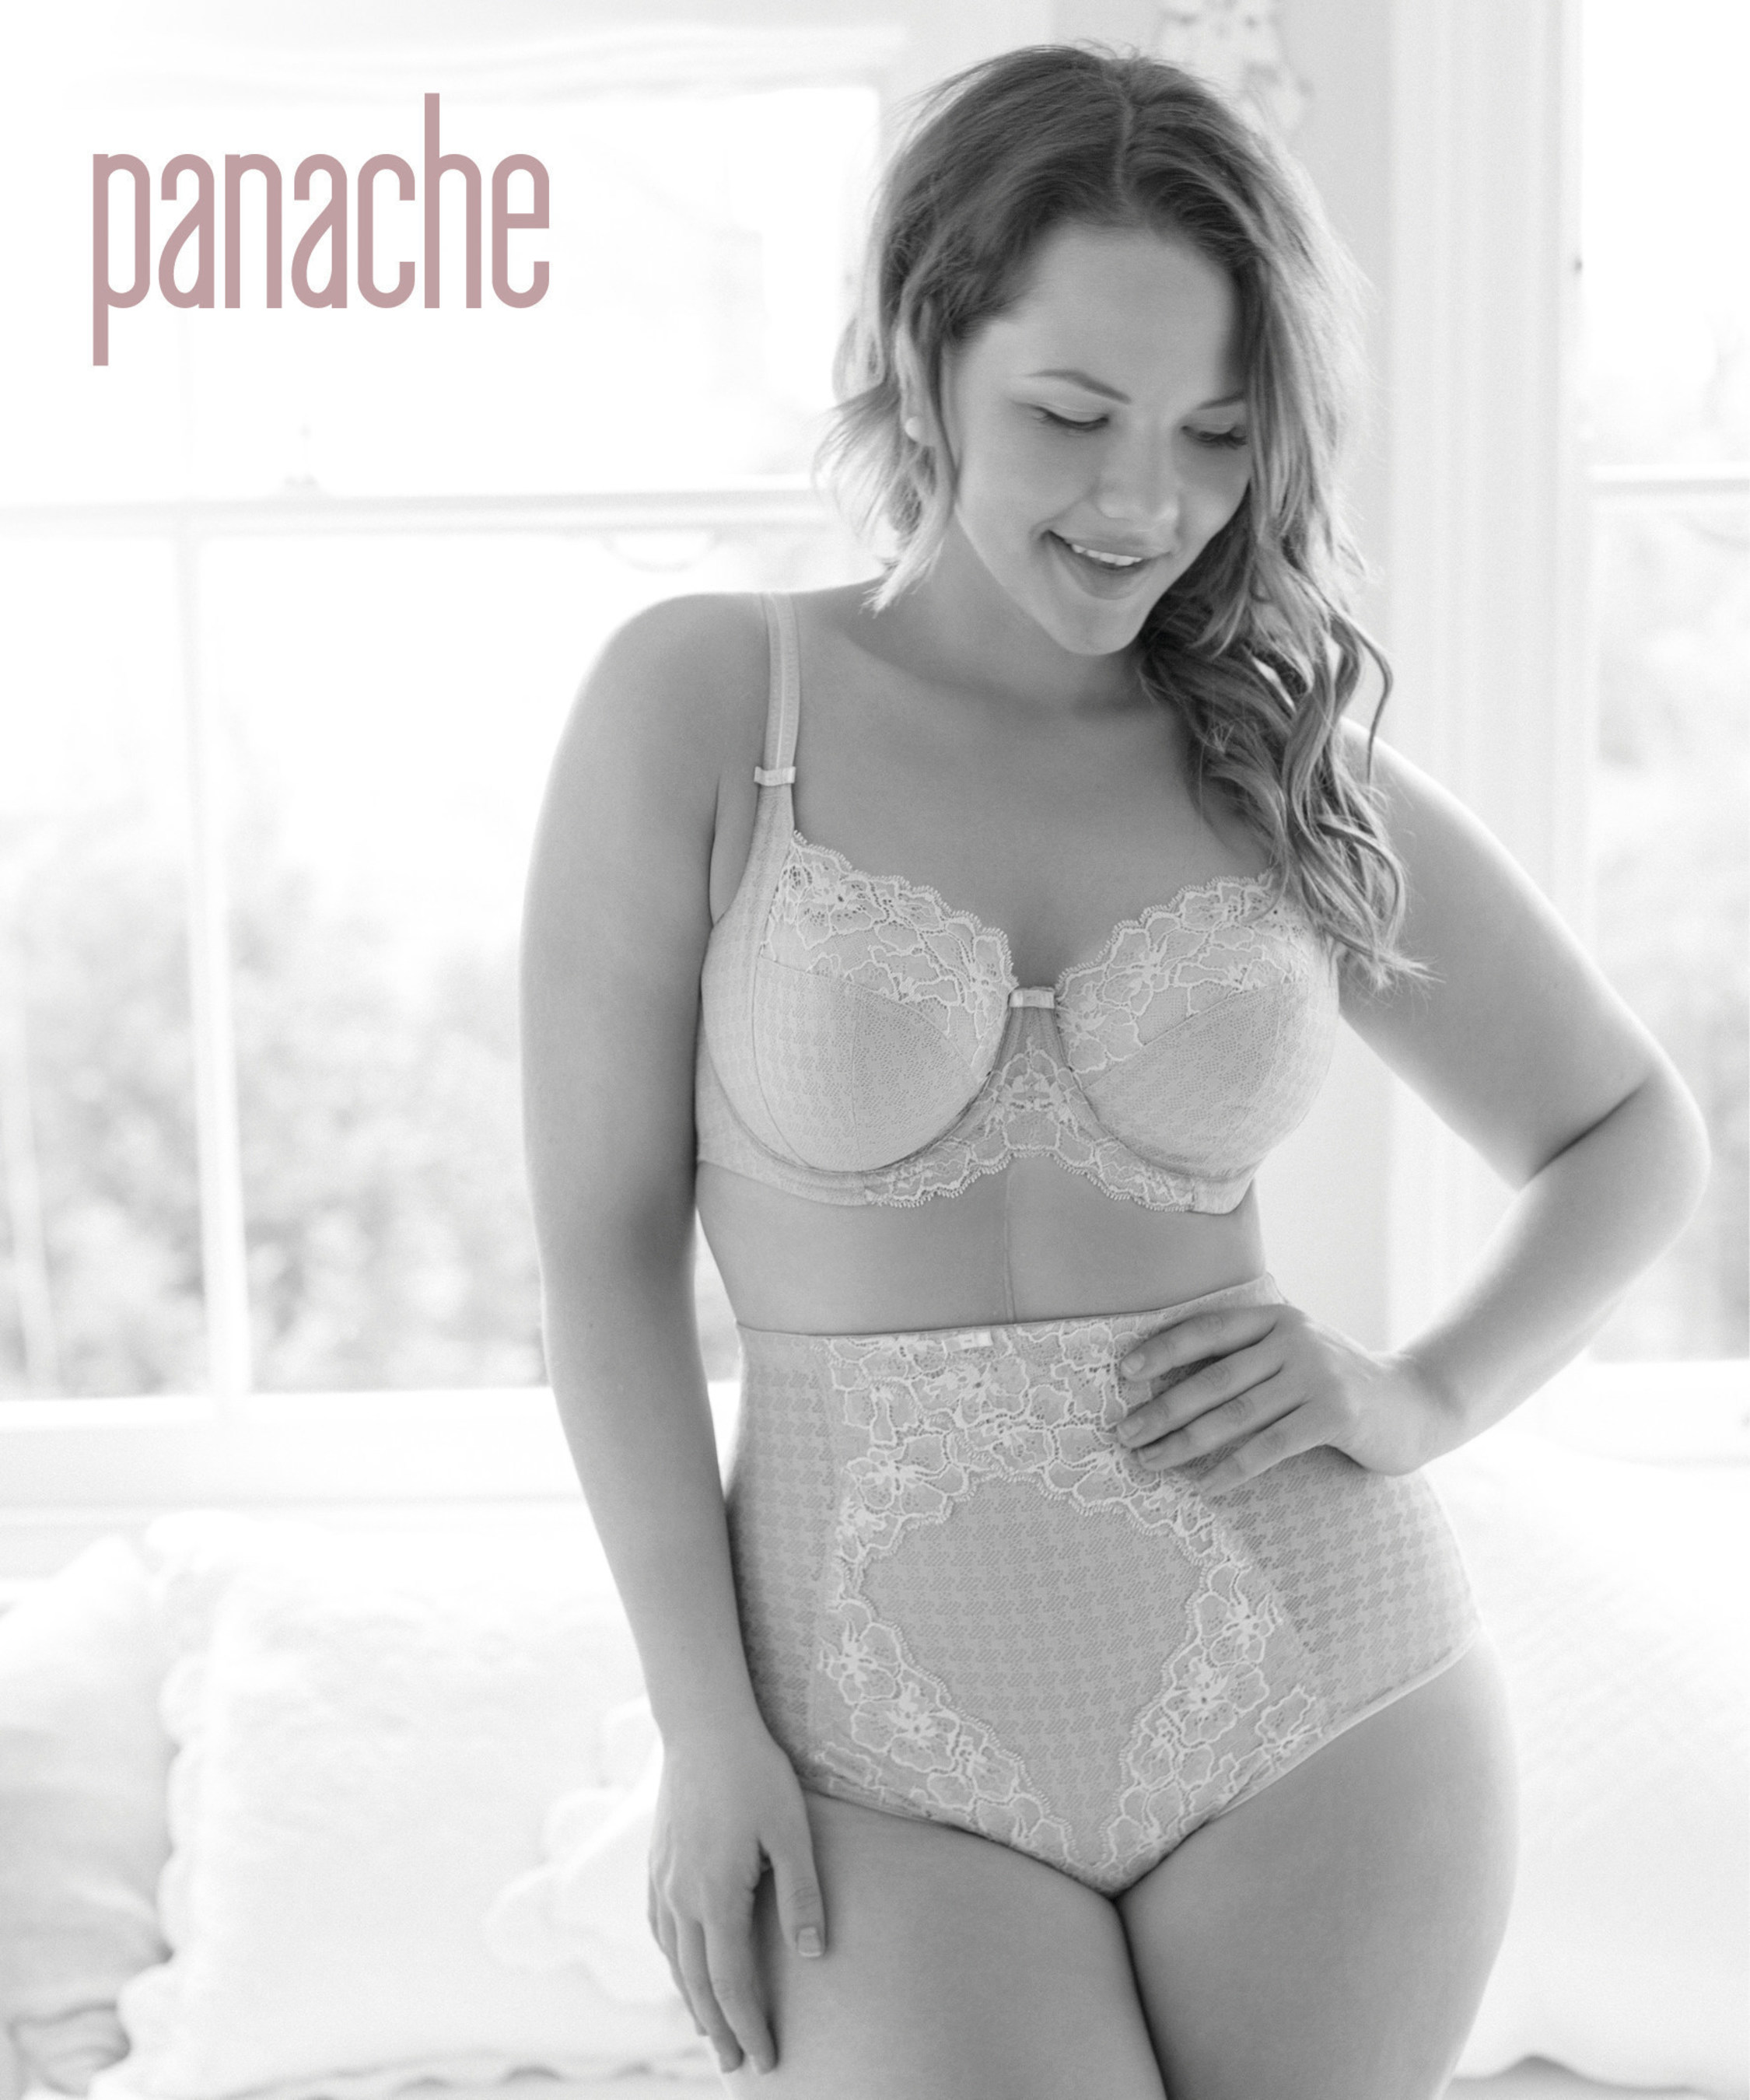 Panache Launches "Modeled By Role Models," an Lingerie Campaign